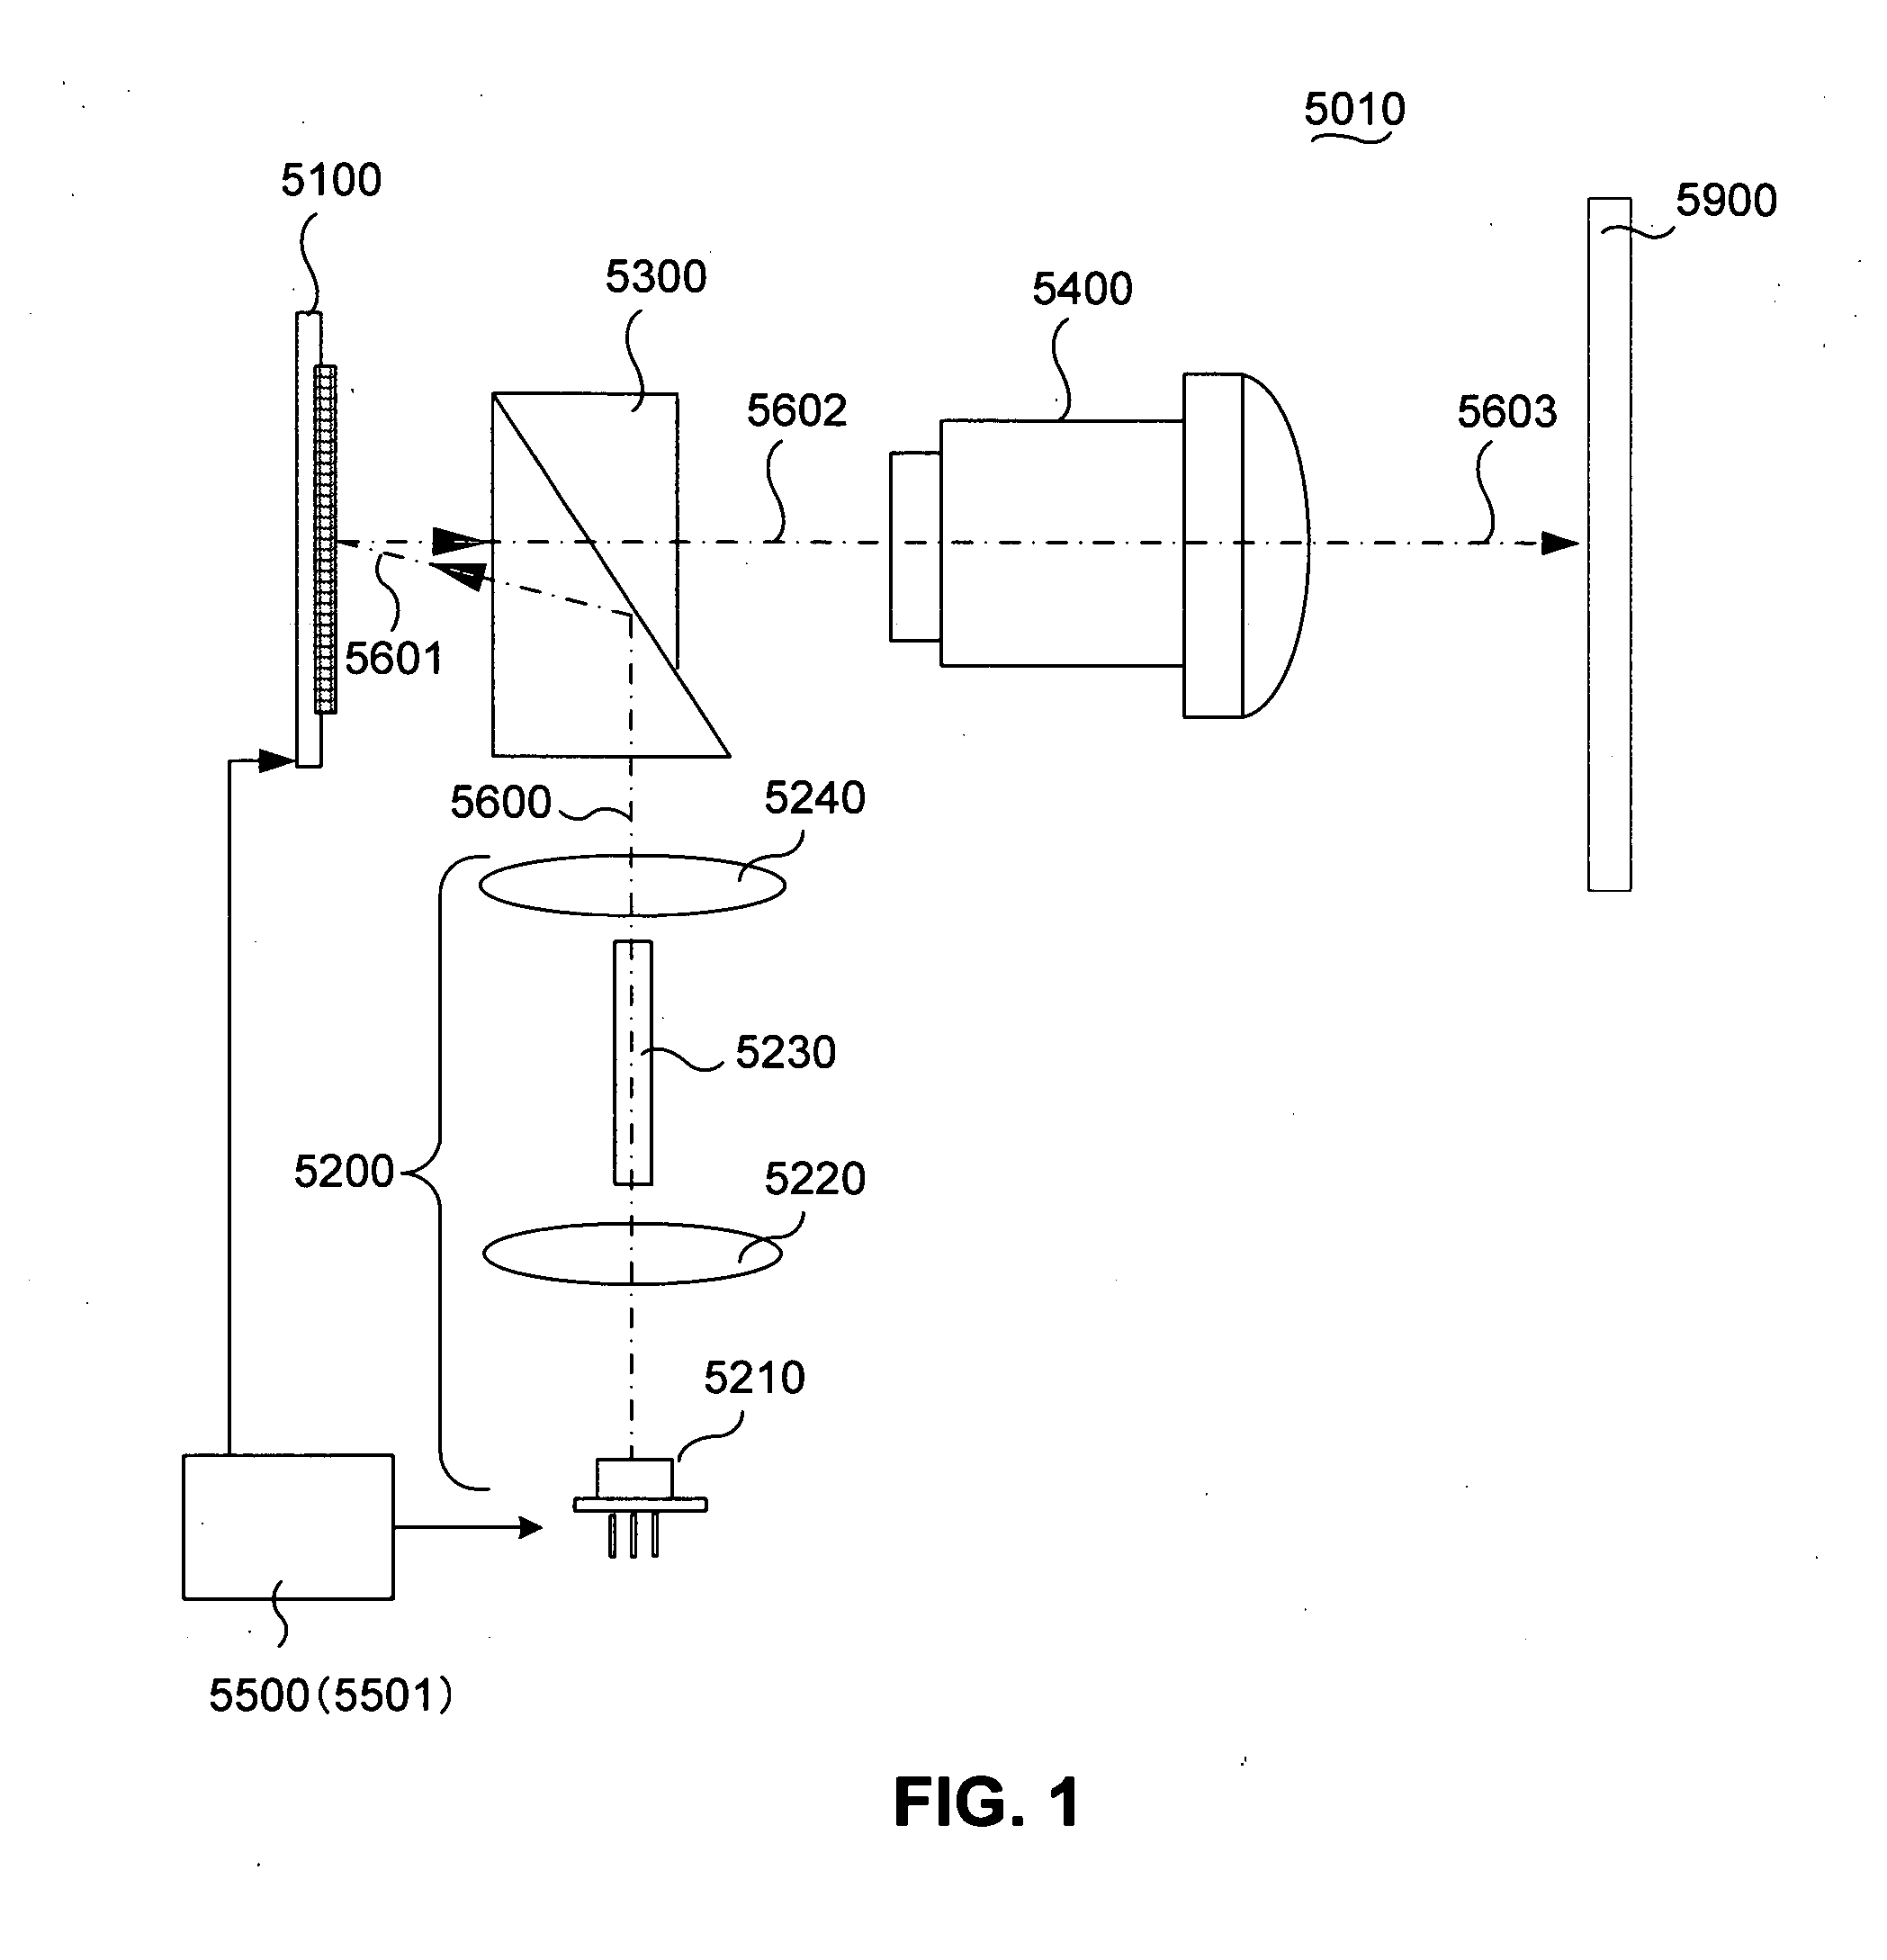 Synchronous control system for light source and spatial light modulator employed in projection apparatus